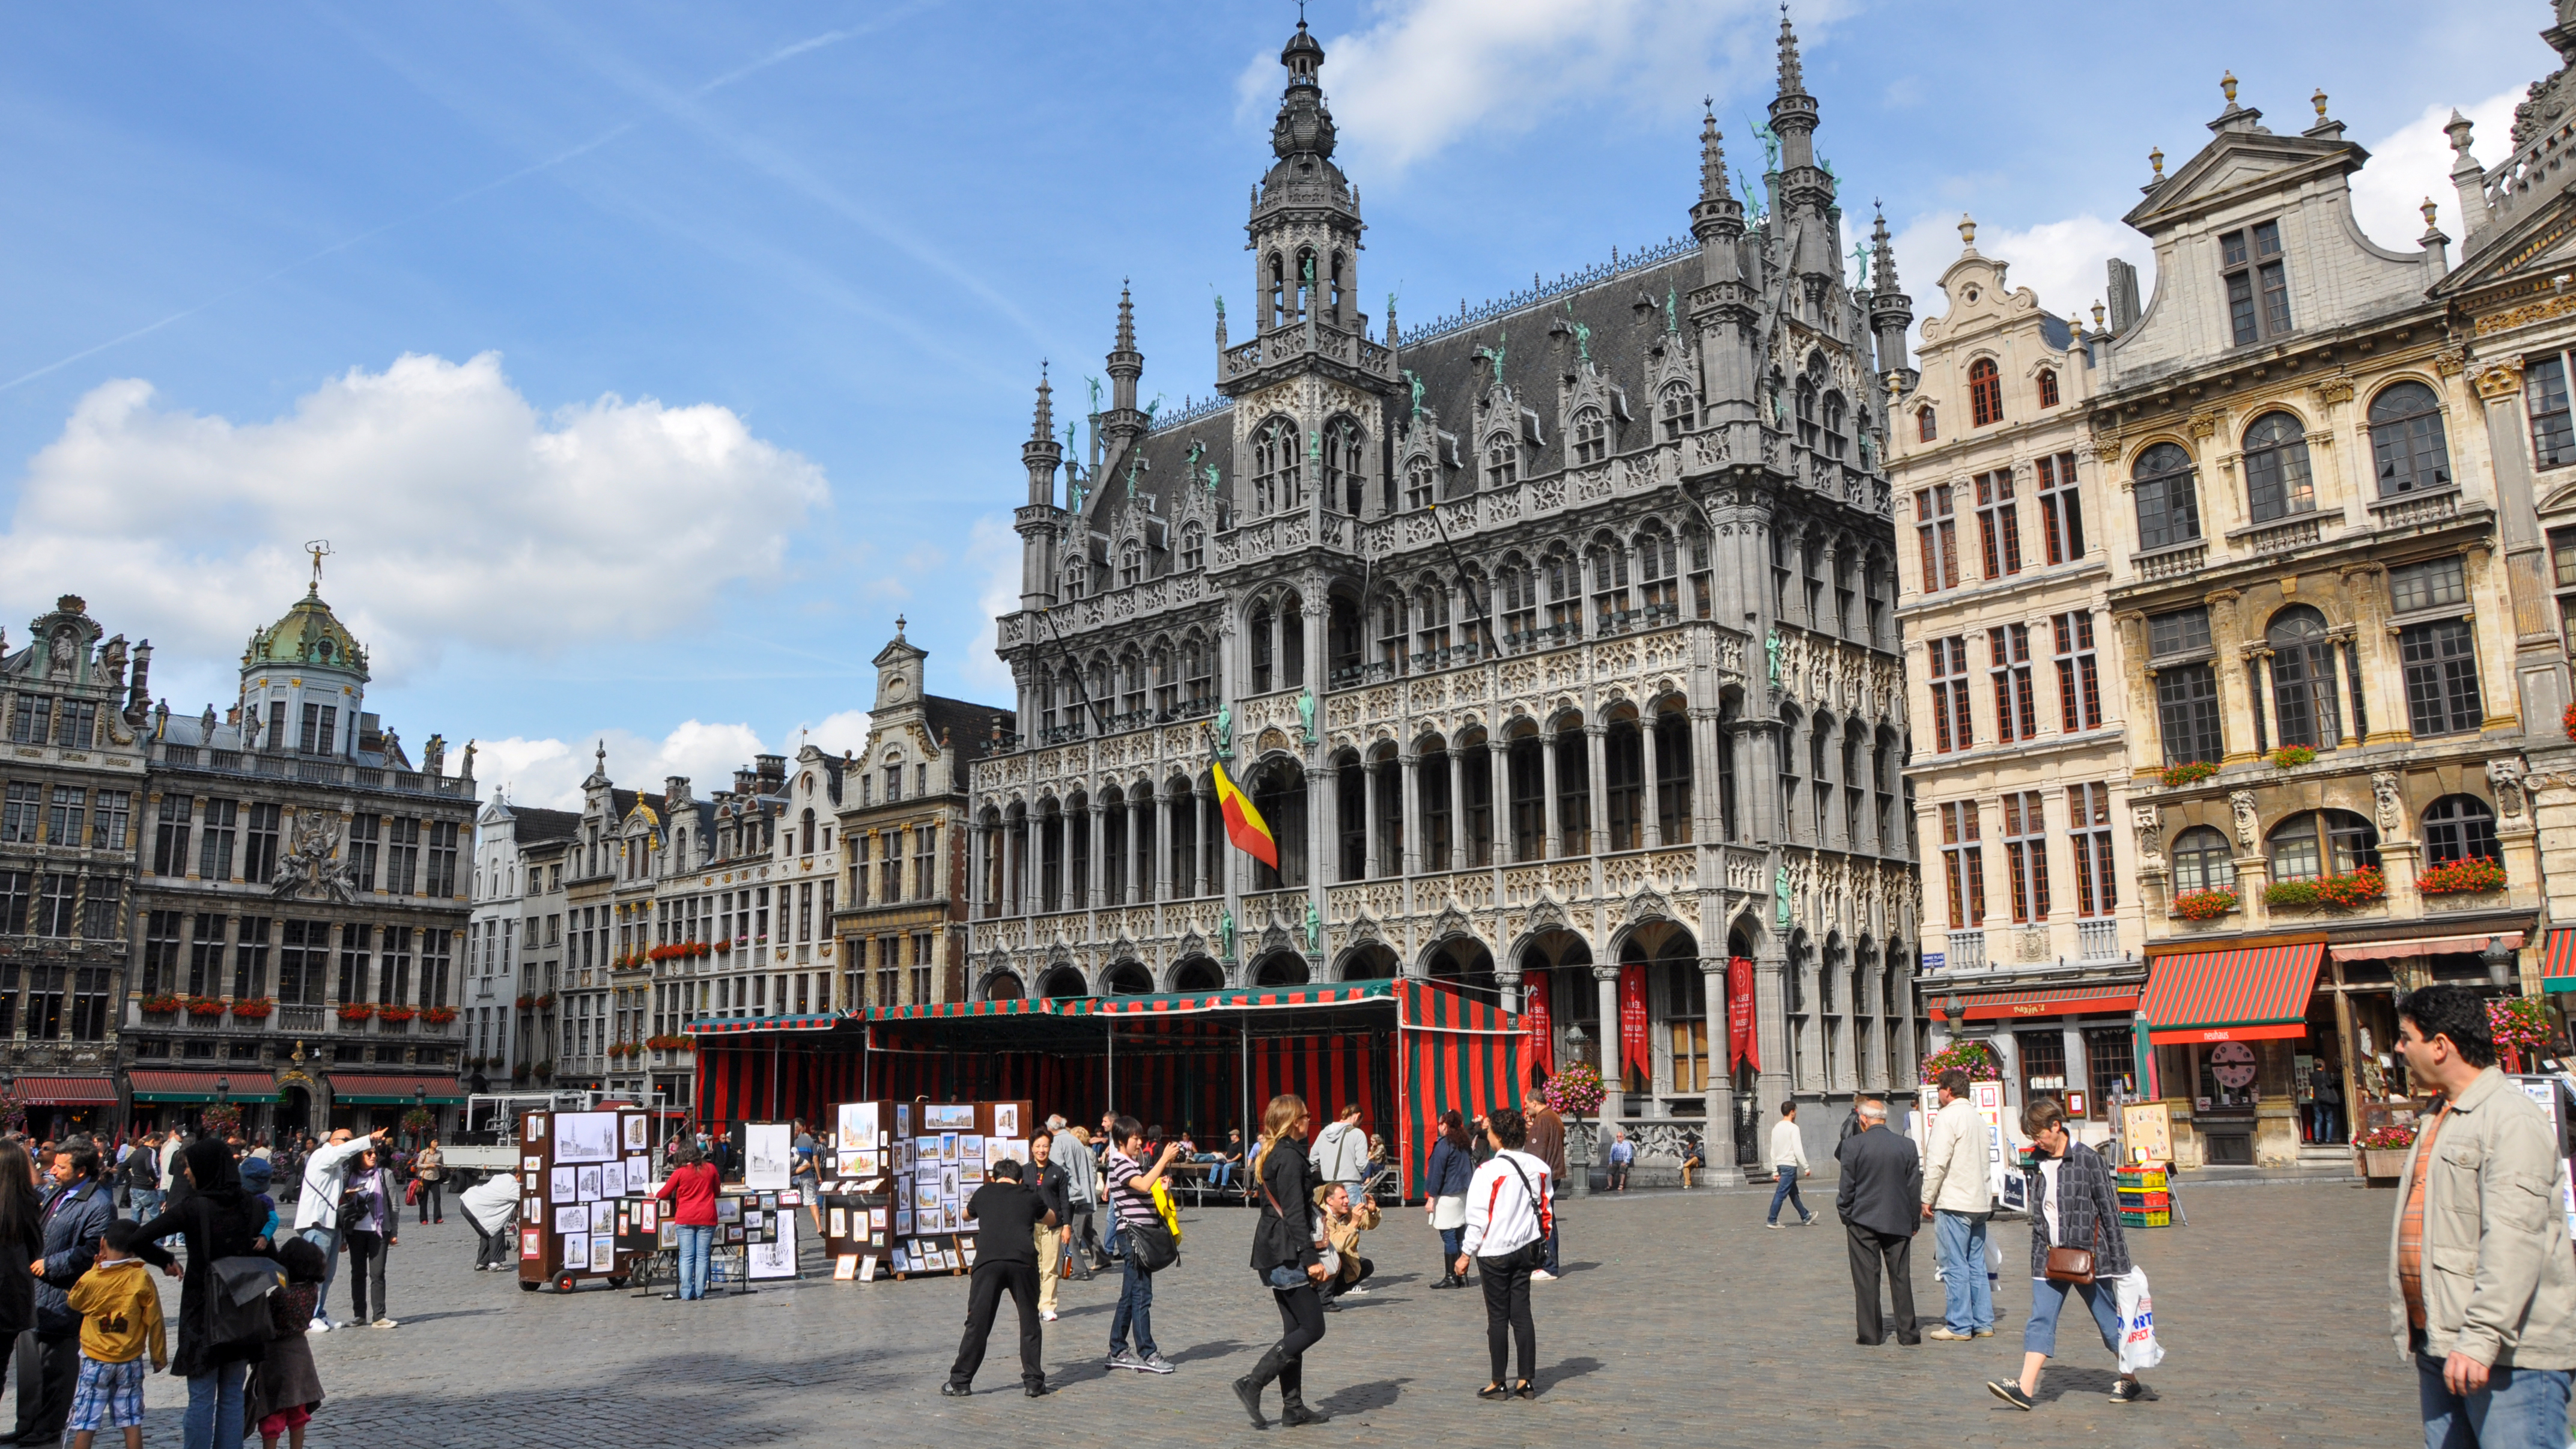 Brussels: Where Political Power Meets Good Living by Rick Steves